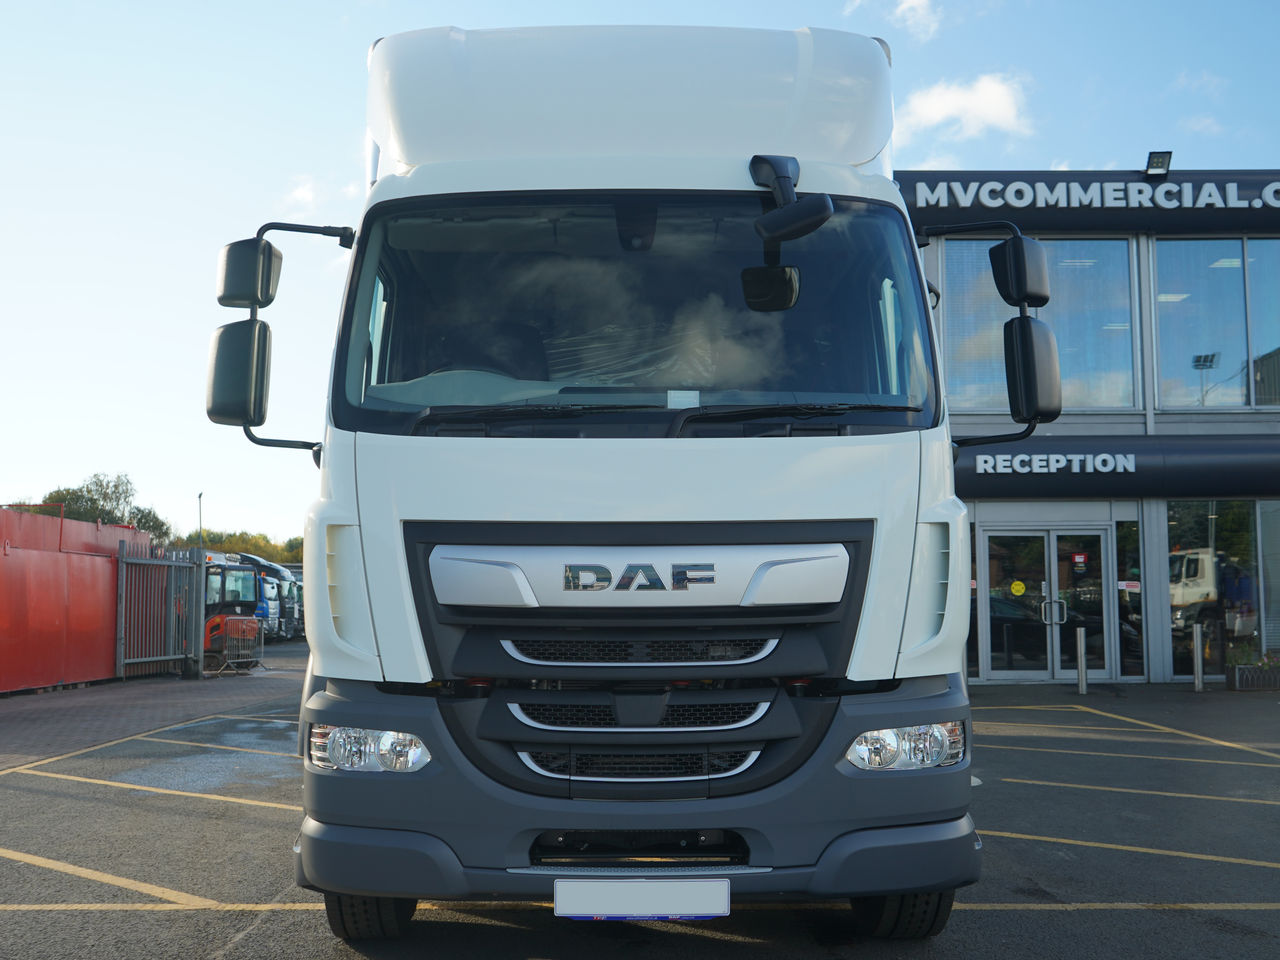 Ready to go DAF LF 290, Box, 290, 18 Tonne, Sleeper Cab, Automatic, 1500kg Column Tail Lift, Advanced Emergency Braking System (AEBS), Air Conditioning, Air Kit, Cab Sunvisor , , -, - | for sale at MV Commercial, the UKs leading Truck, Trailers and Van supplier. (SN73YSF 104685)